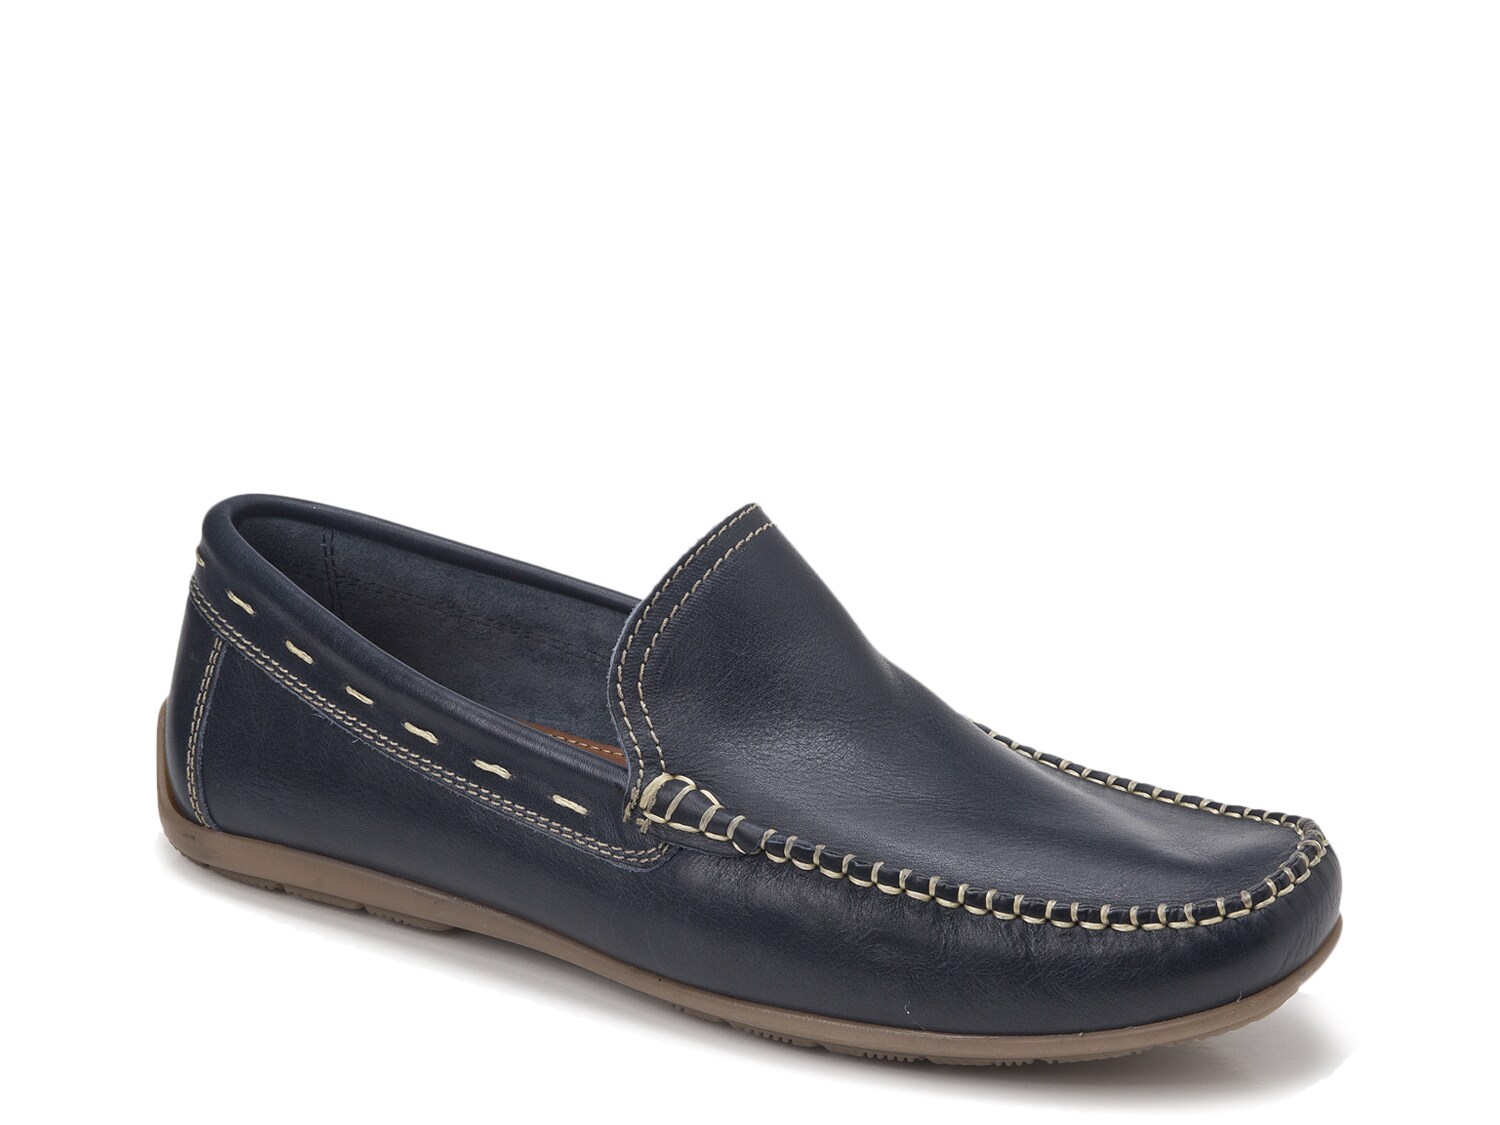 Sandro Moscoloni Sagres Loafer - Free Shipping | DSW